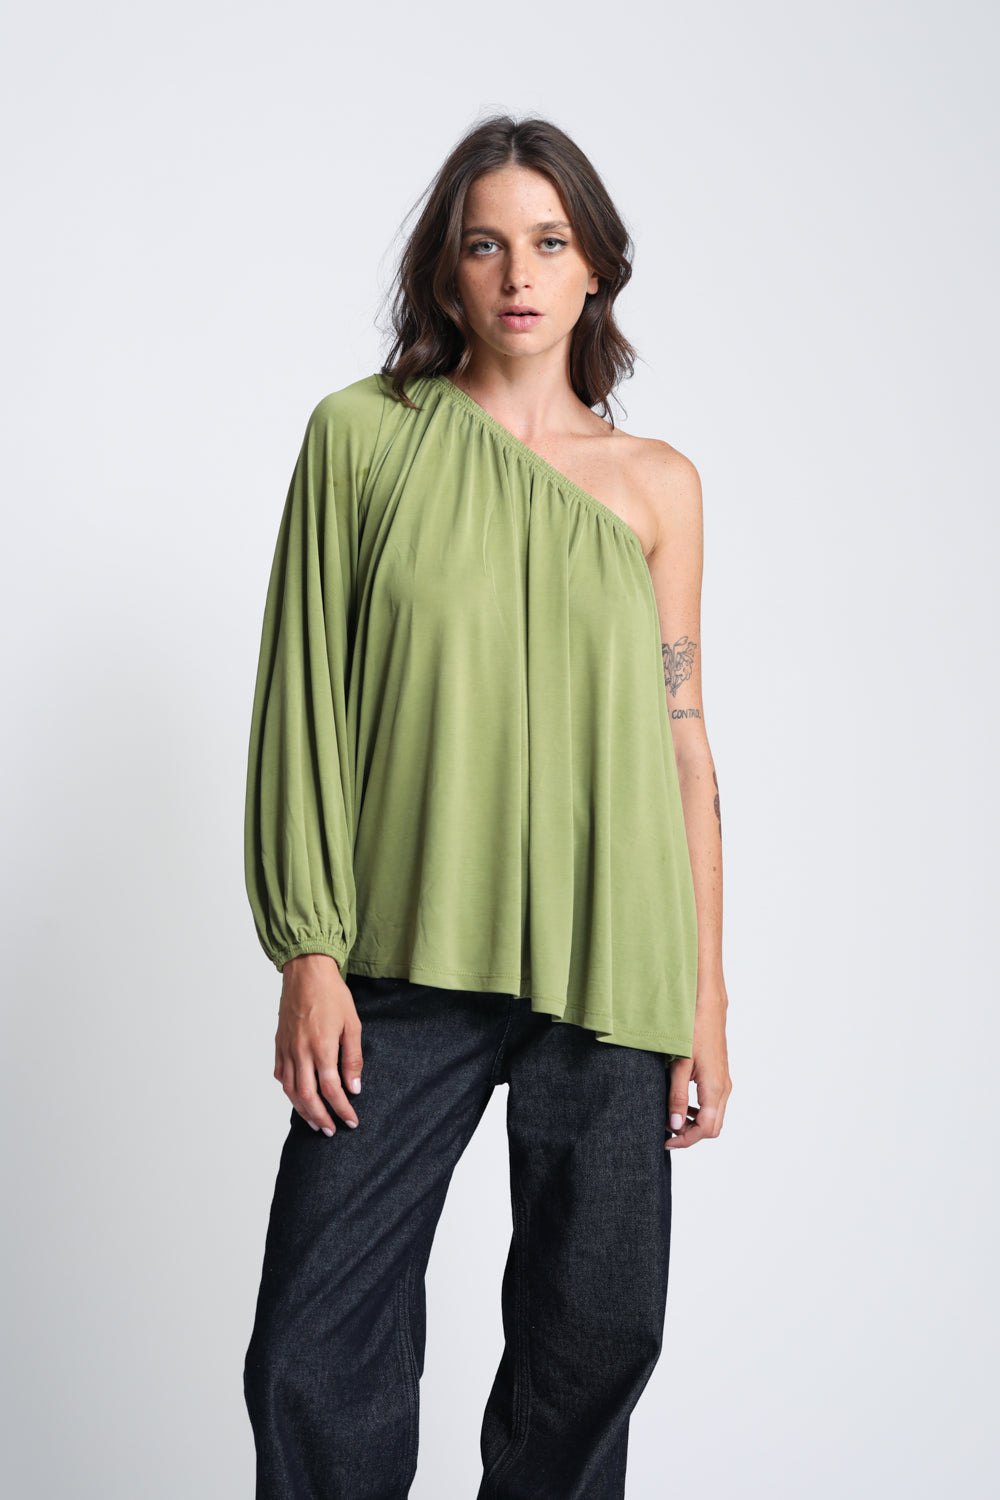 Discover Green Top